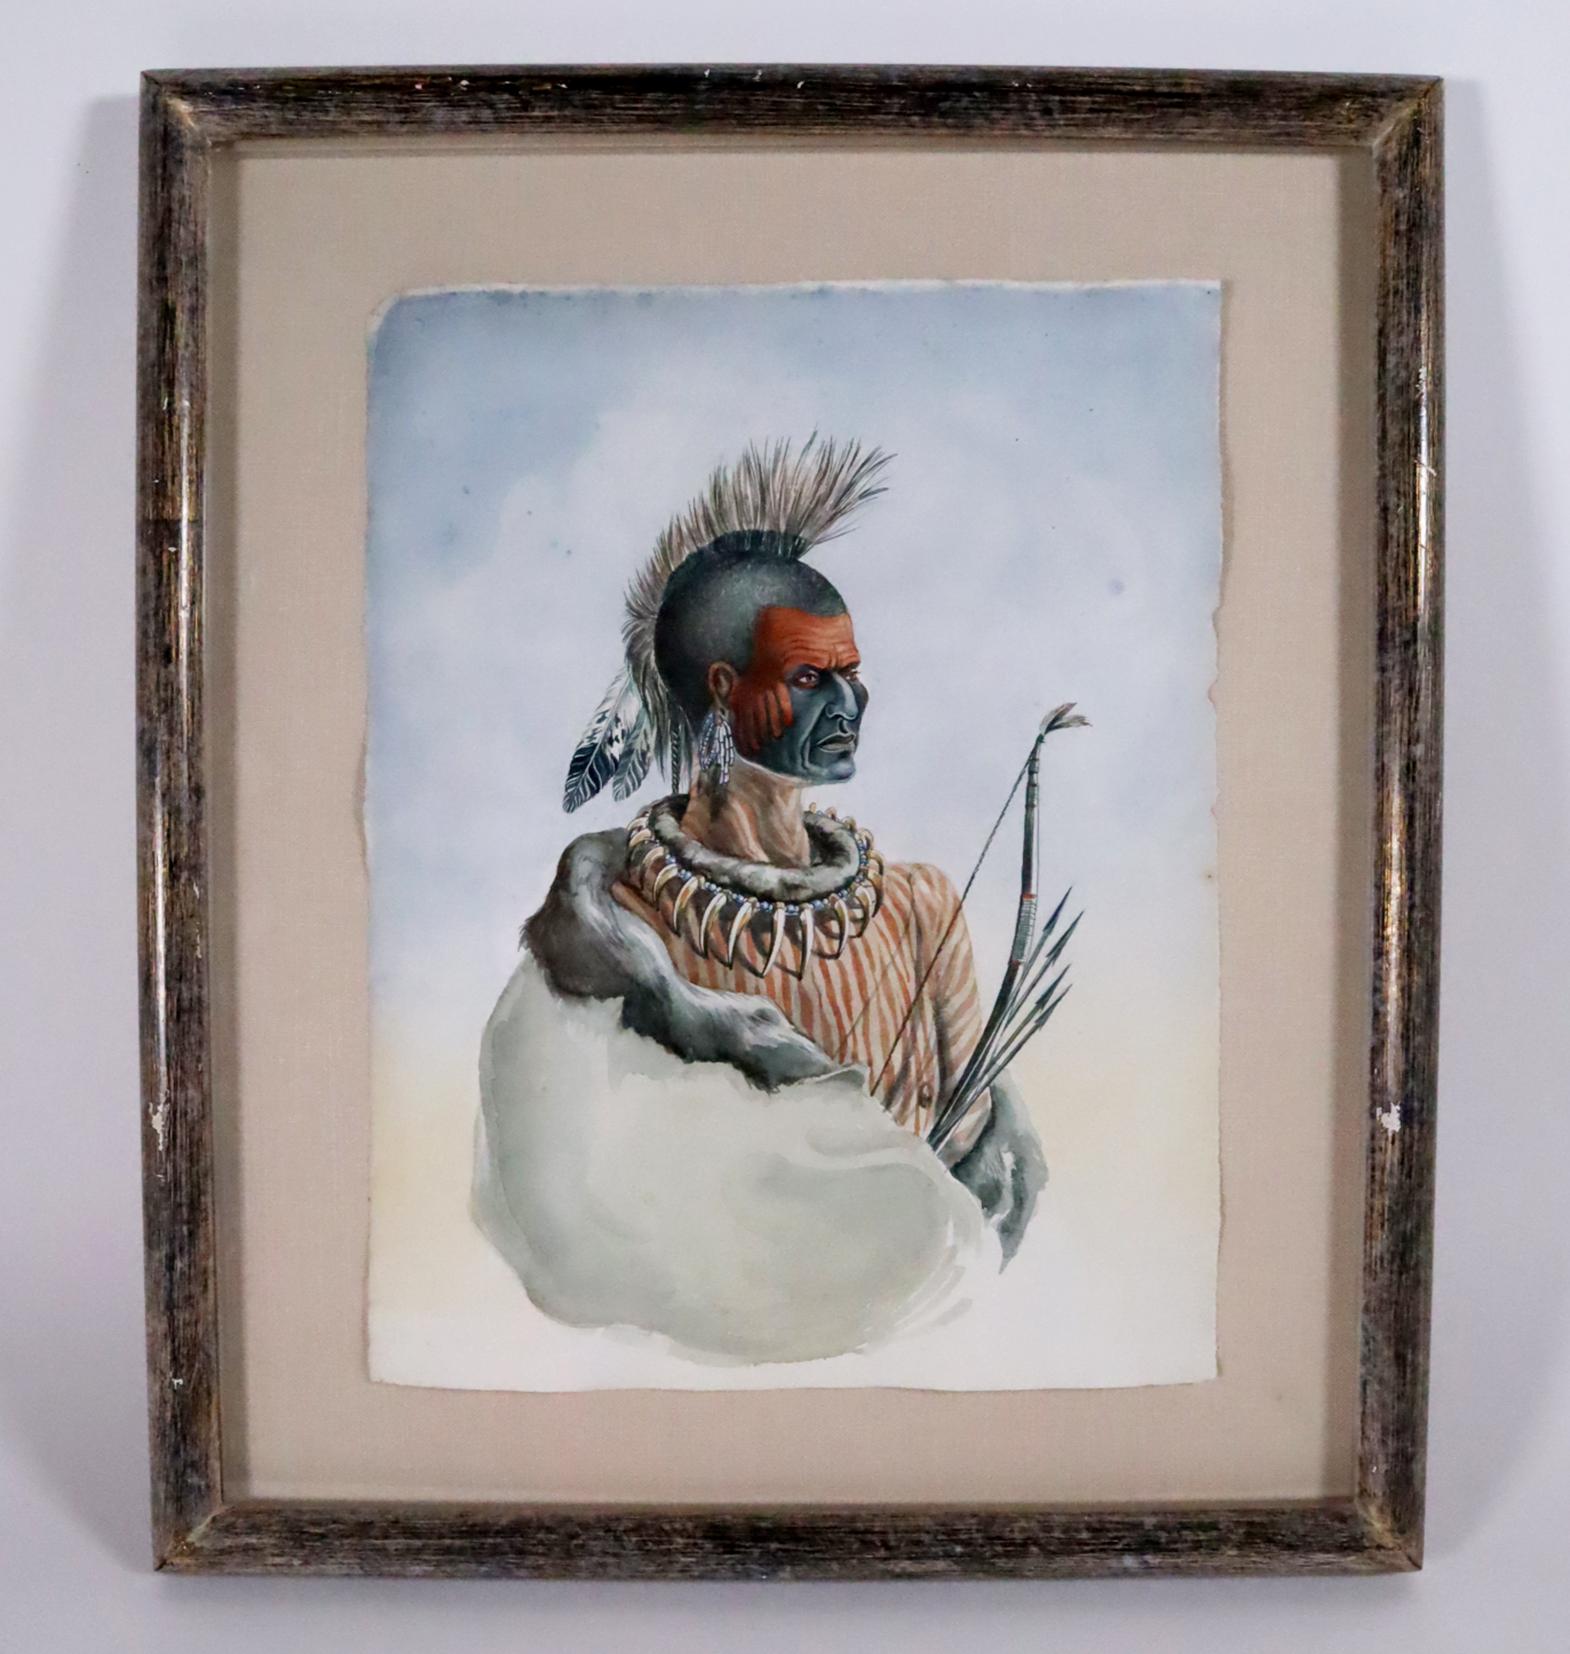 Four Portraits of Native Americans INVENTORY CLEARANCE SALE - Tribal Painting by Bertha M. Farr